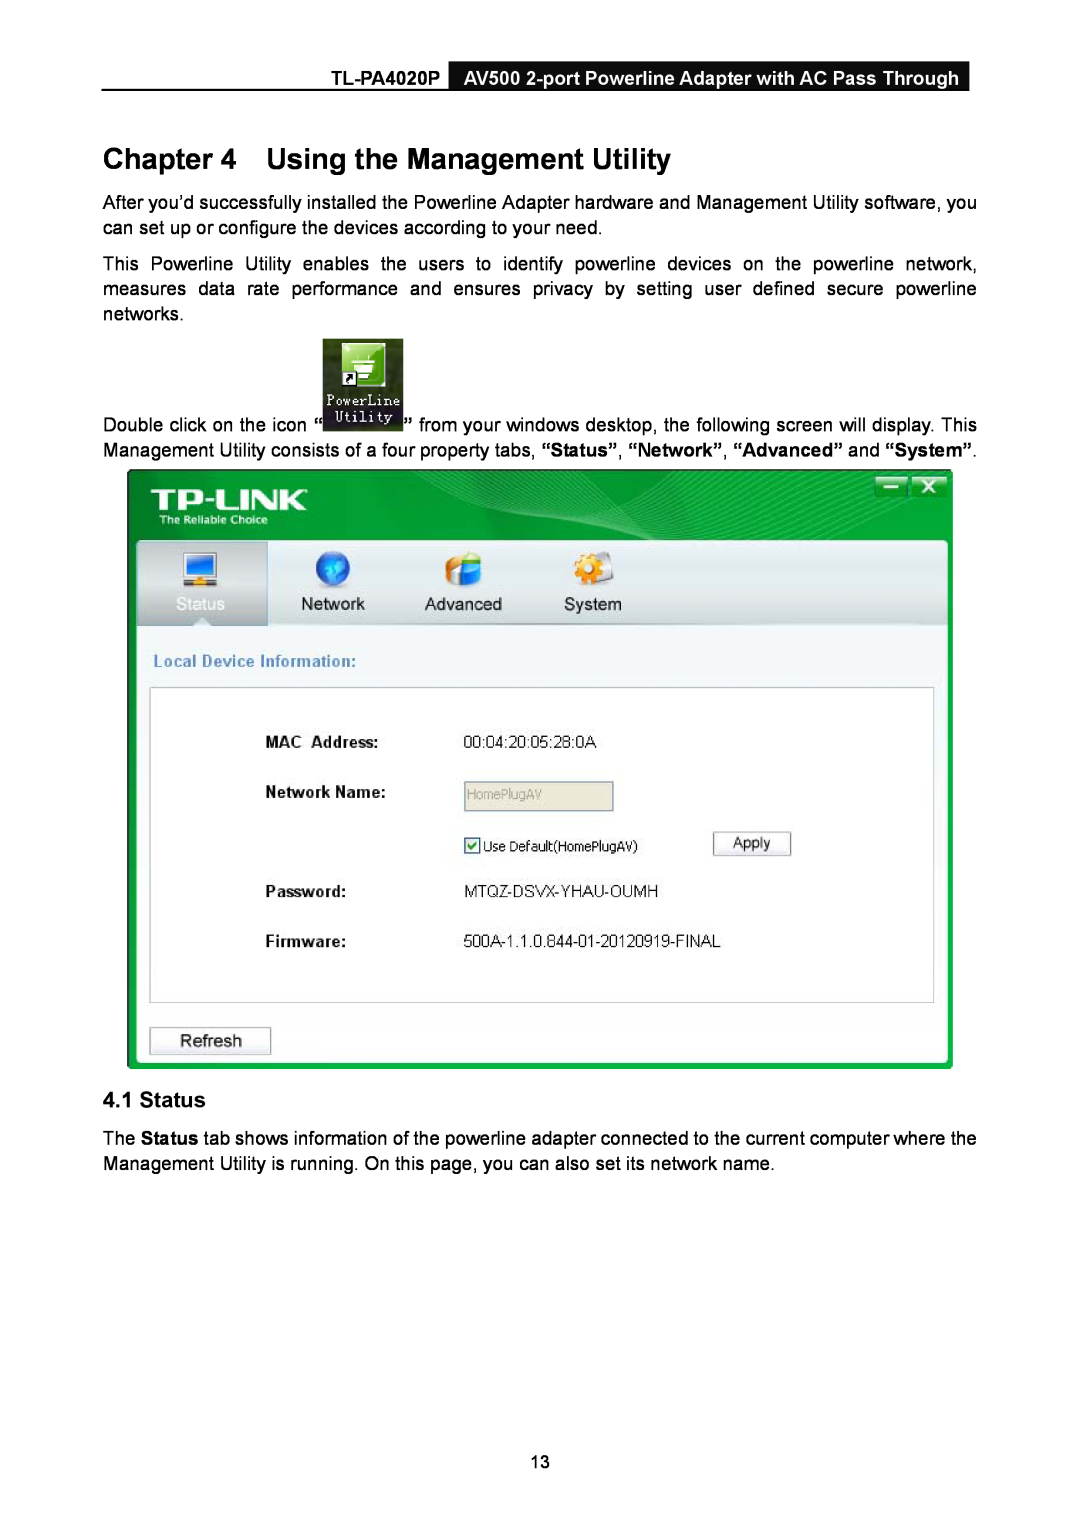 TP-Link manual Using the Management Utility, Status, TL-PA4020P AV500 2-port Powerline Adapter with AC Pass Through 